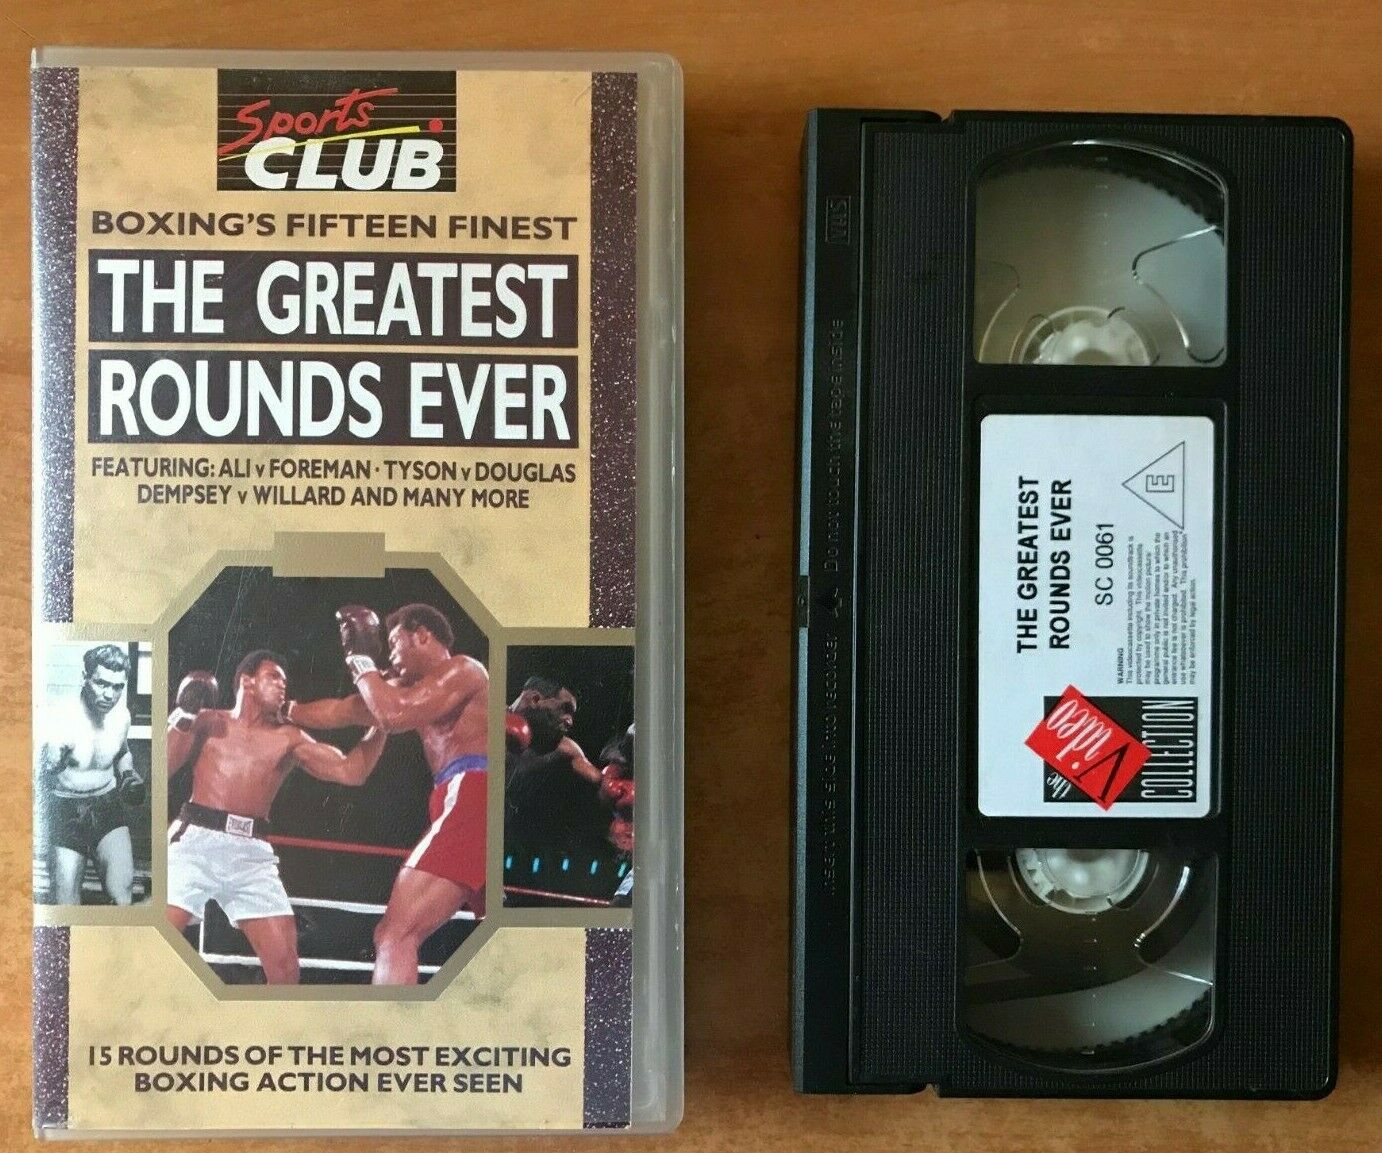 The Greatest Rounds Ever (Boxing's 15 Finest): Tyson / Foreman / Dempsey - VHS-